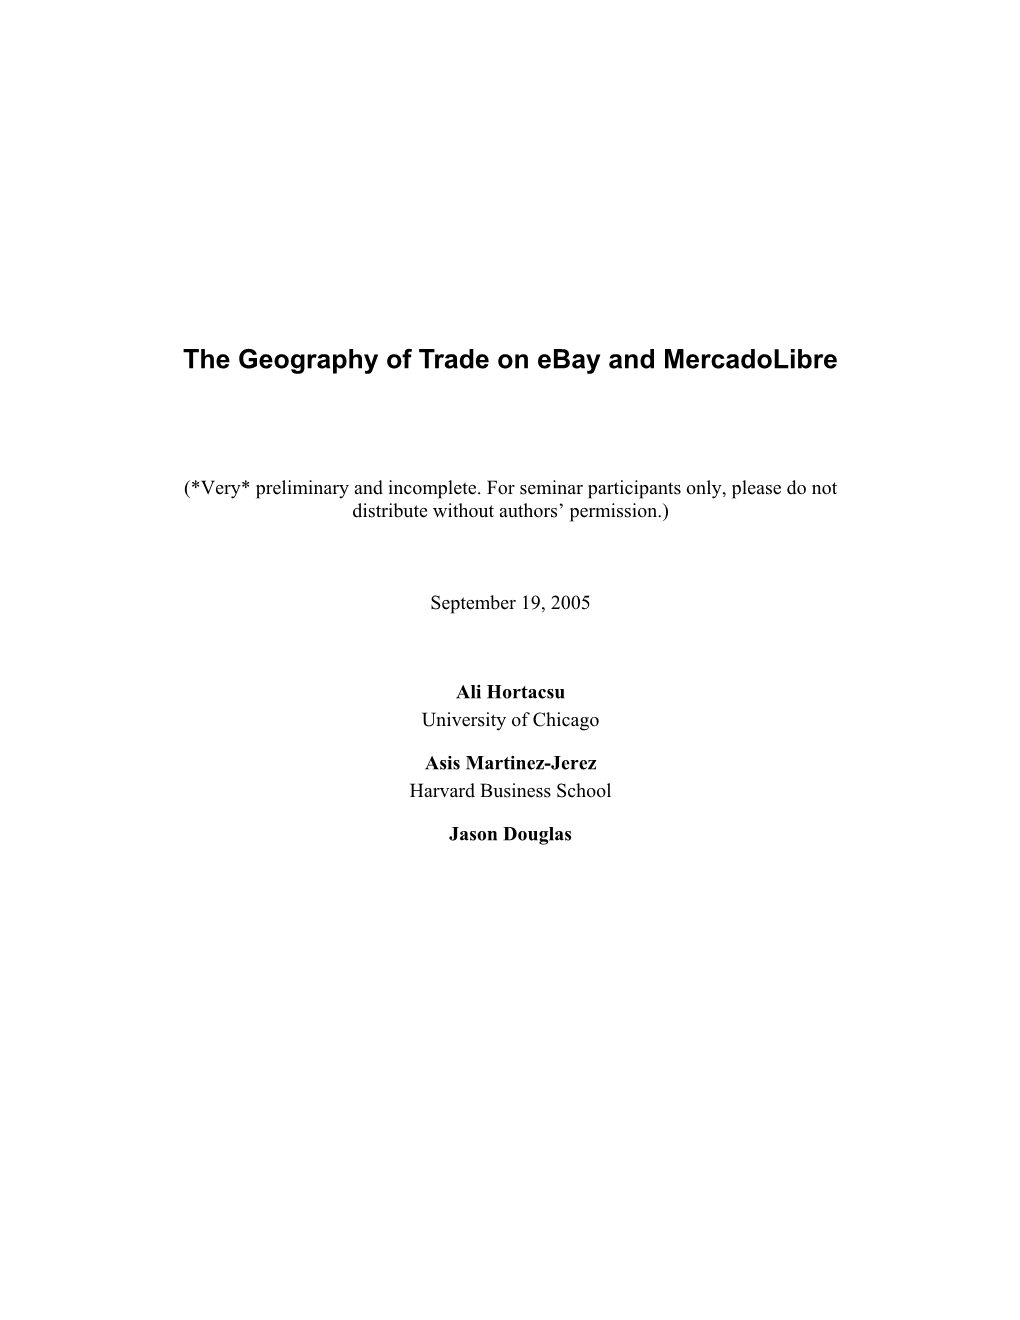 The Geography of Trade on Ebay and Mercadolibre